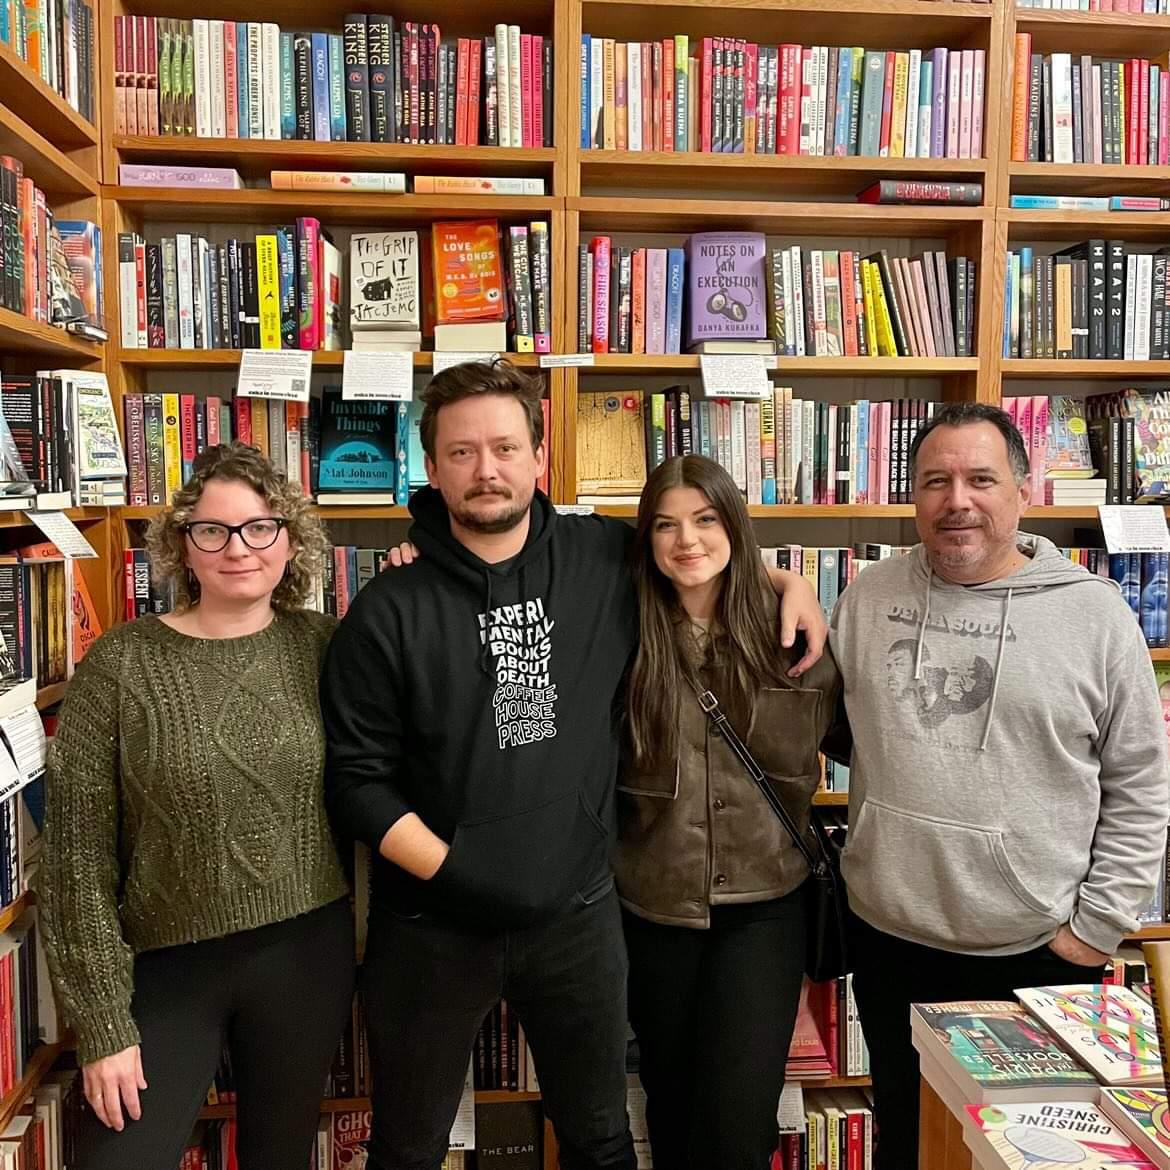 It's nice to have a day that recognizes bookstores as important places in our communities, but bookstores wouldn't exist without the giants that keep the coal in the furnace, and I am overflowing with love for these giants.